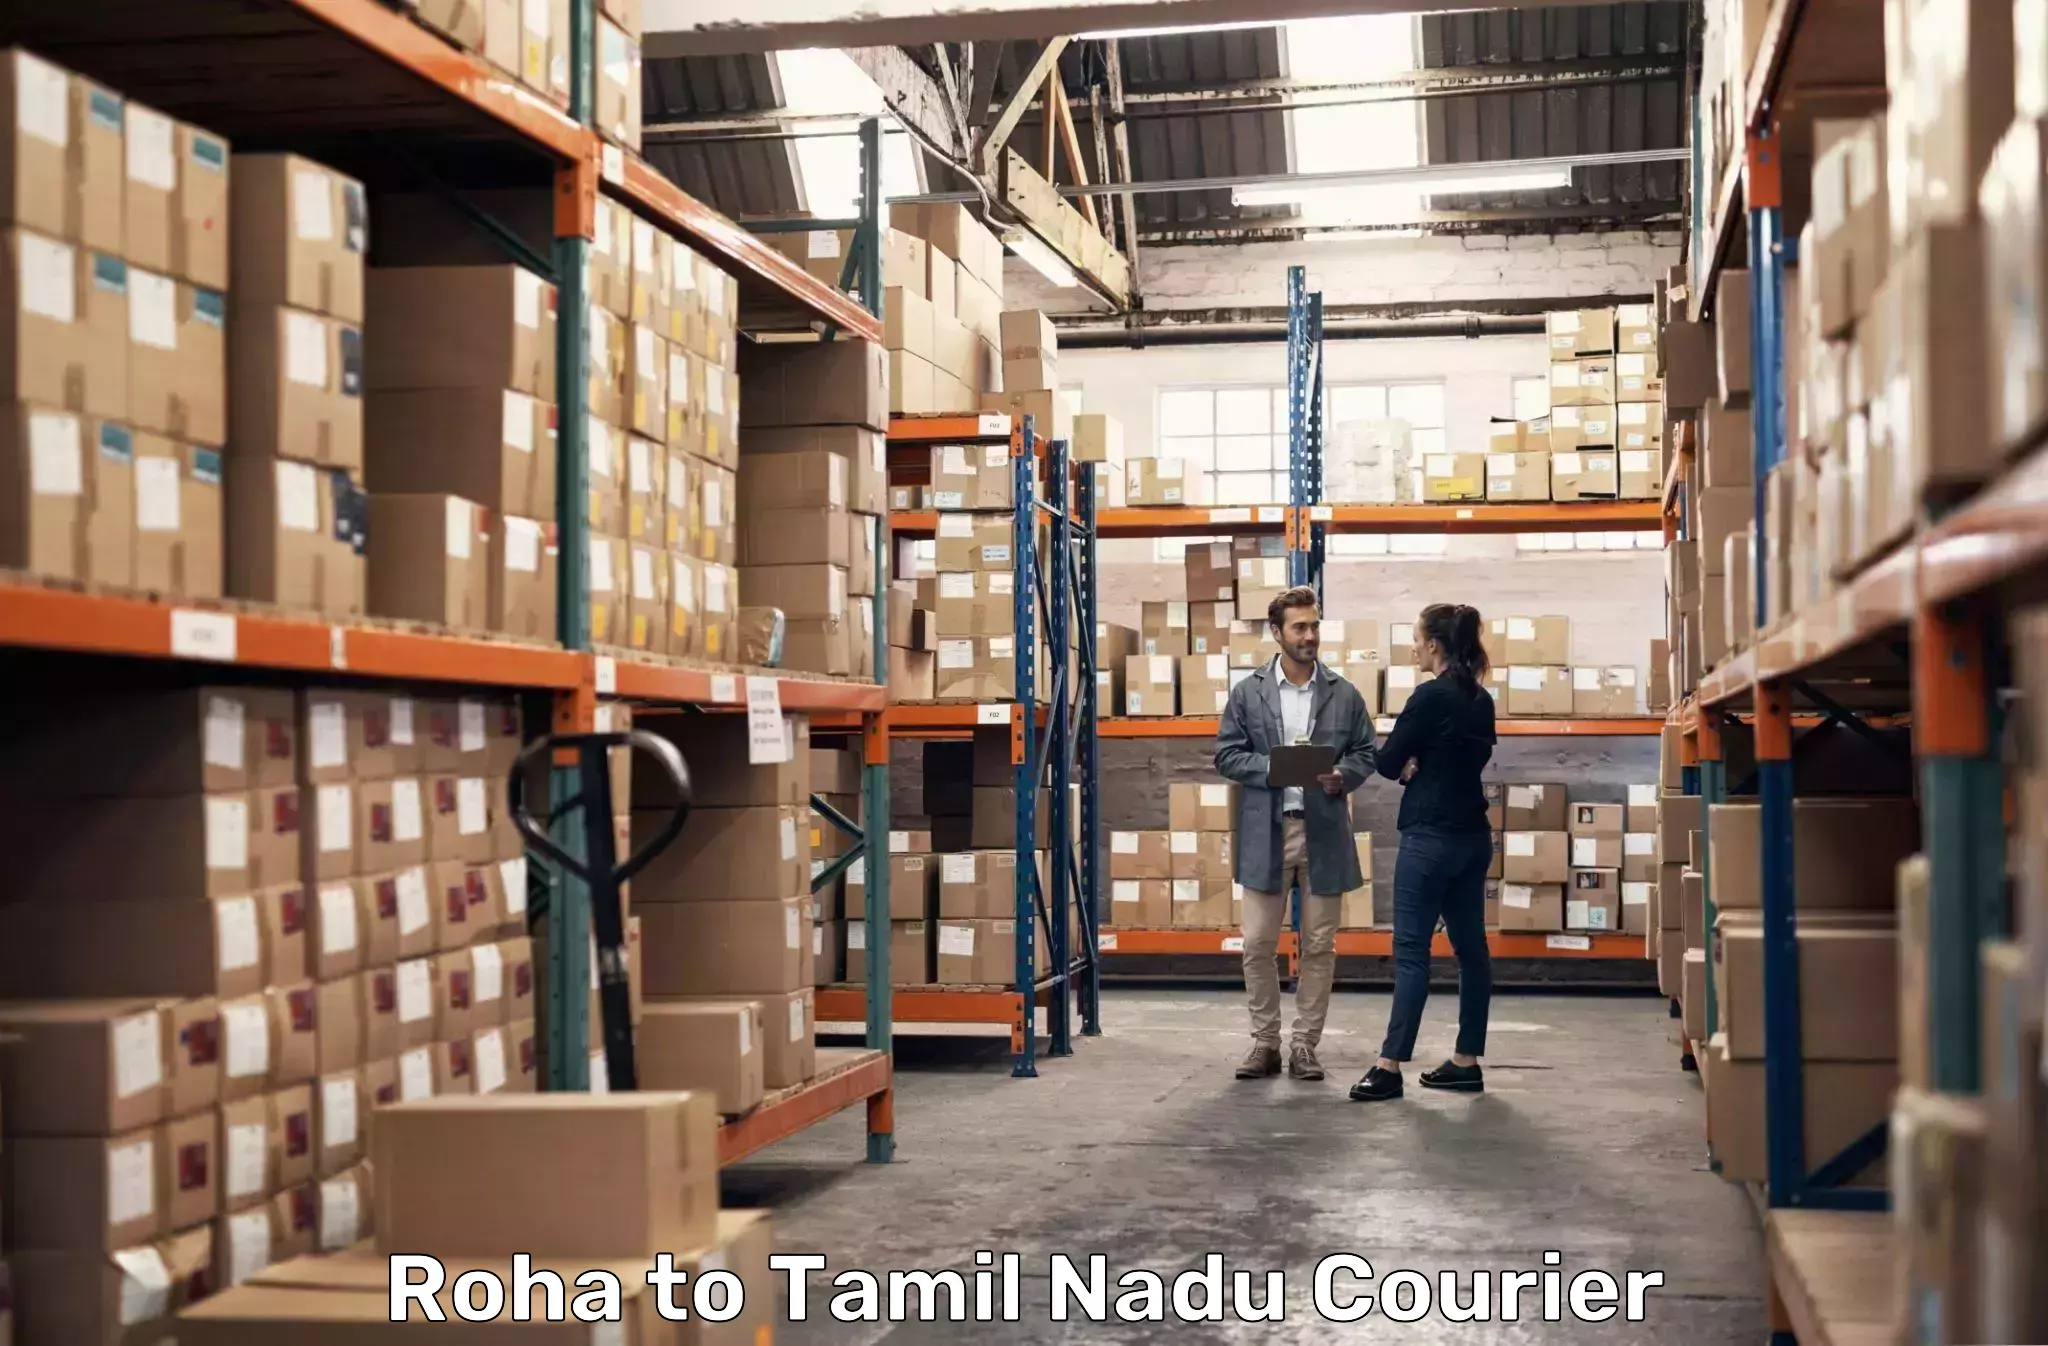 Express package services Roha to Tuticorin Port